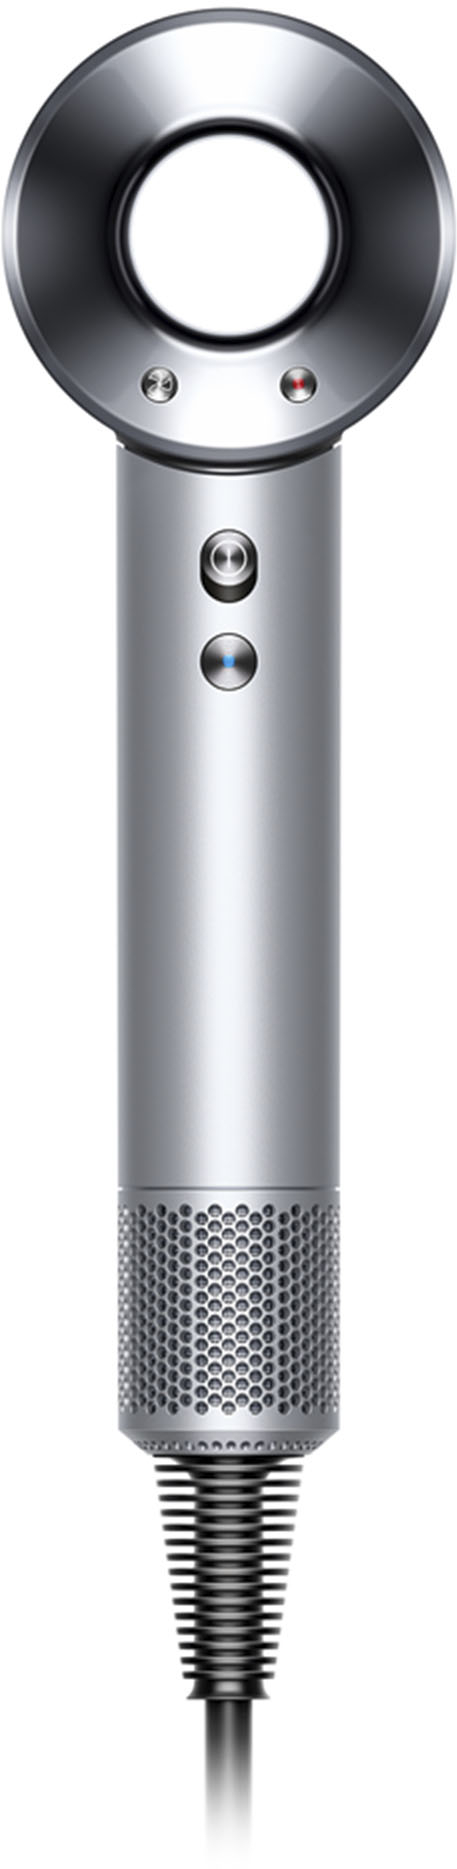 Dyson Supersonic Hair Dryer White/Silver 386840-01 - Best Buy